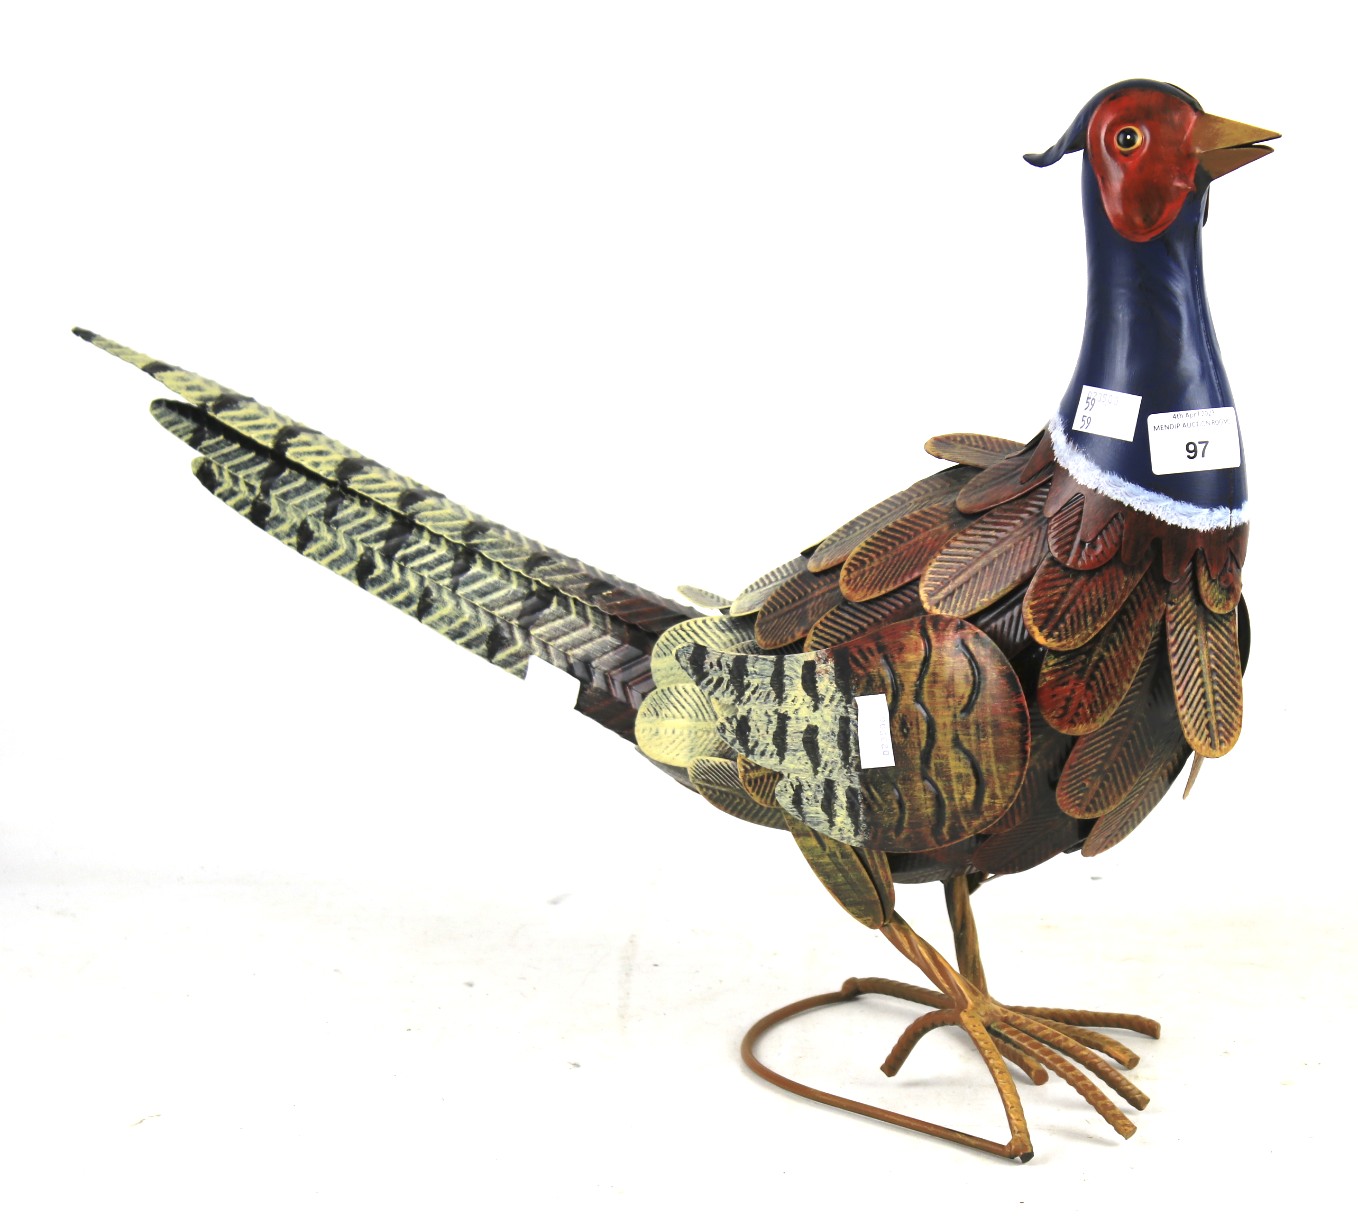 A contemporary pressed metal painted pheasant figurine.